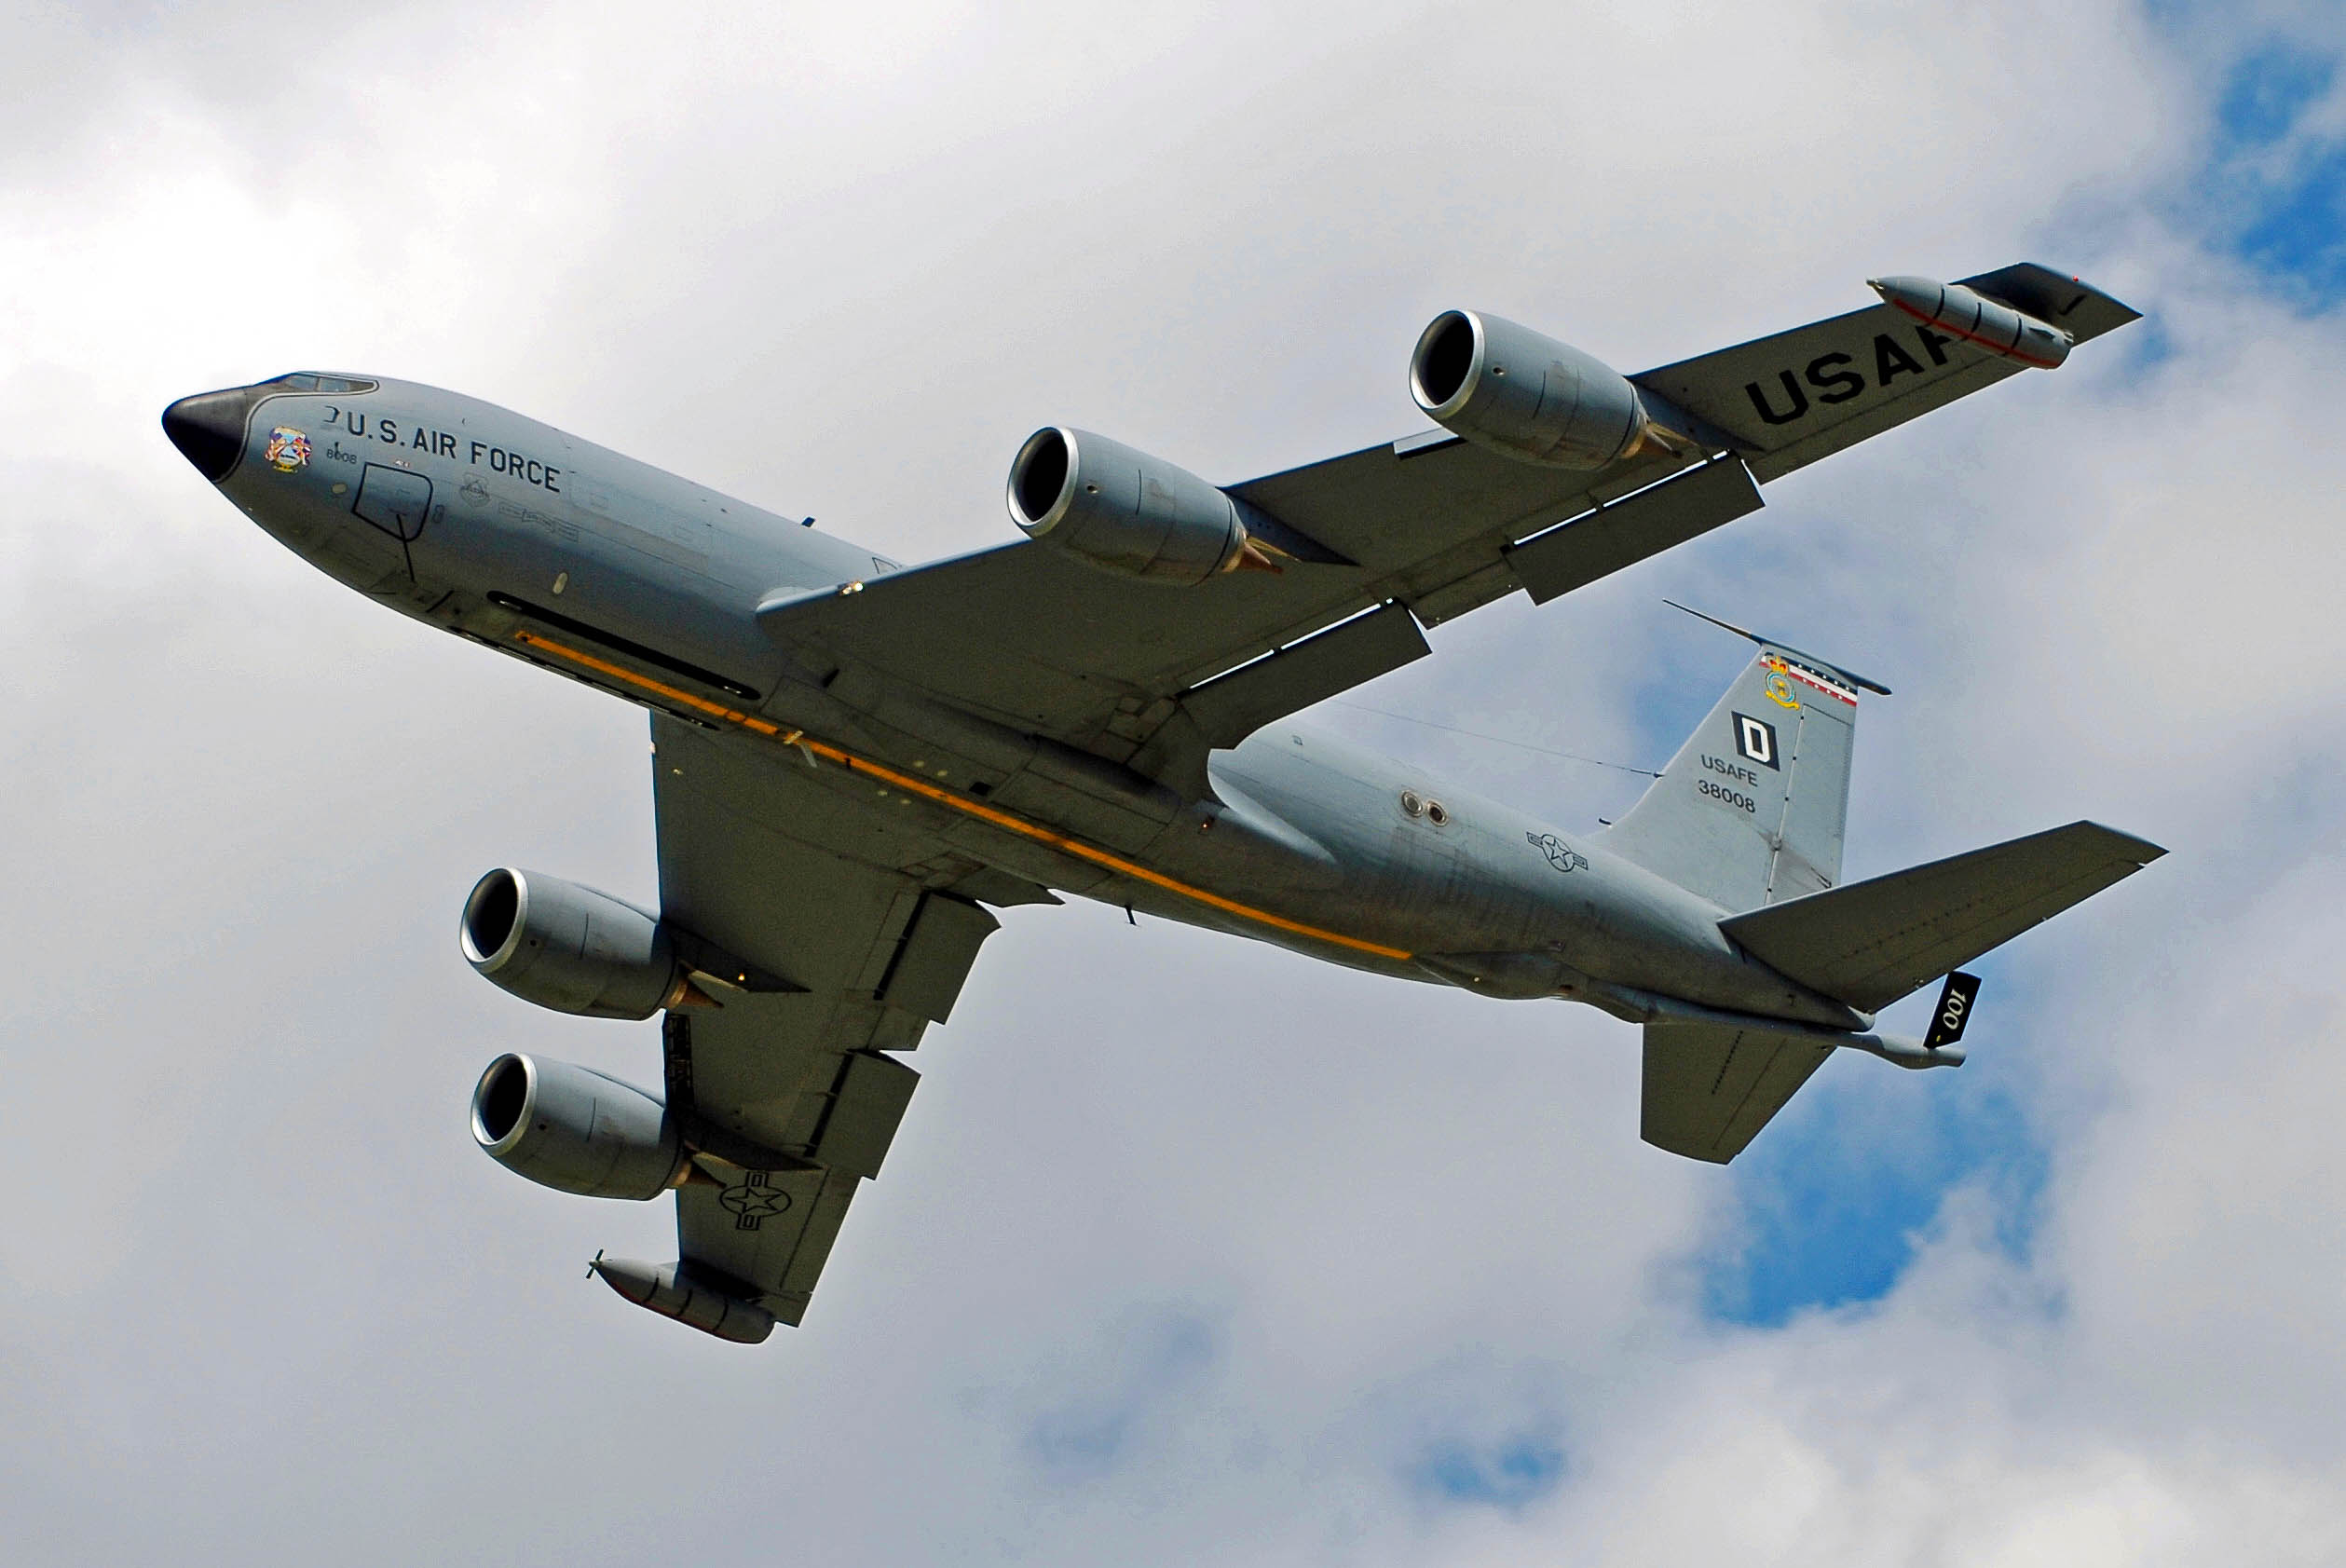 63-8008/638008 USAF - United States Air Force Boeing KC-135R Stratotanker Photo by colinw - AVSpotters.com